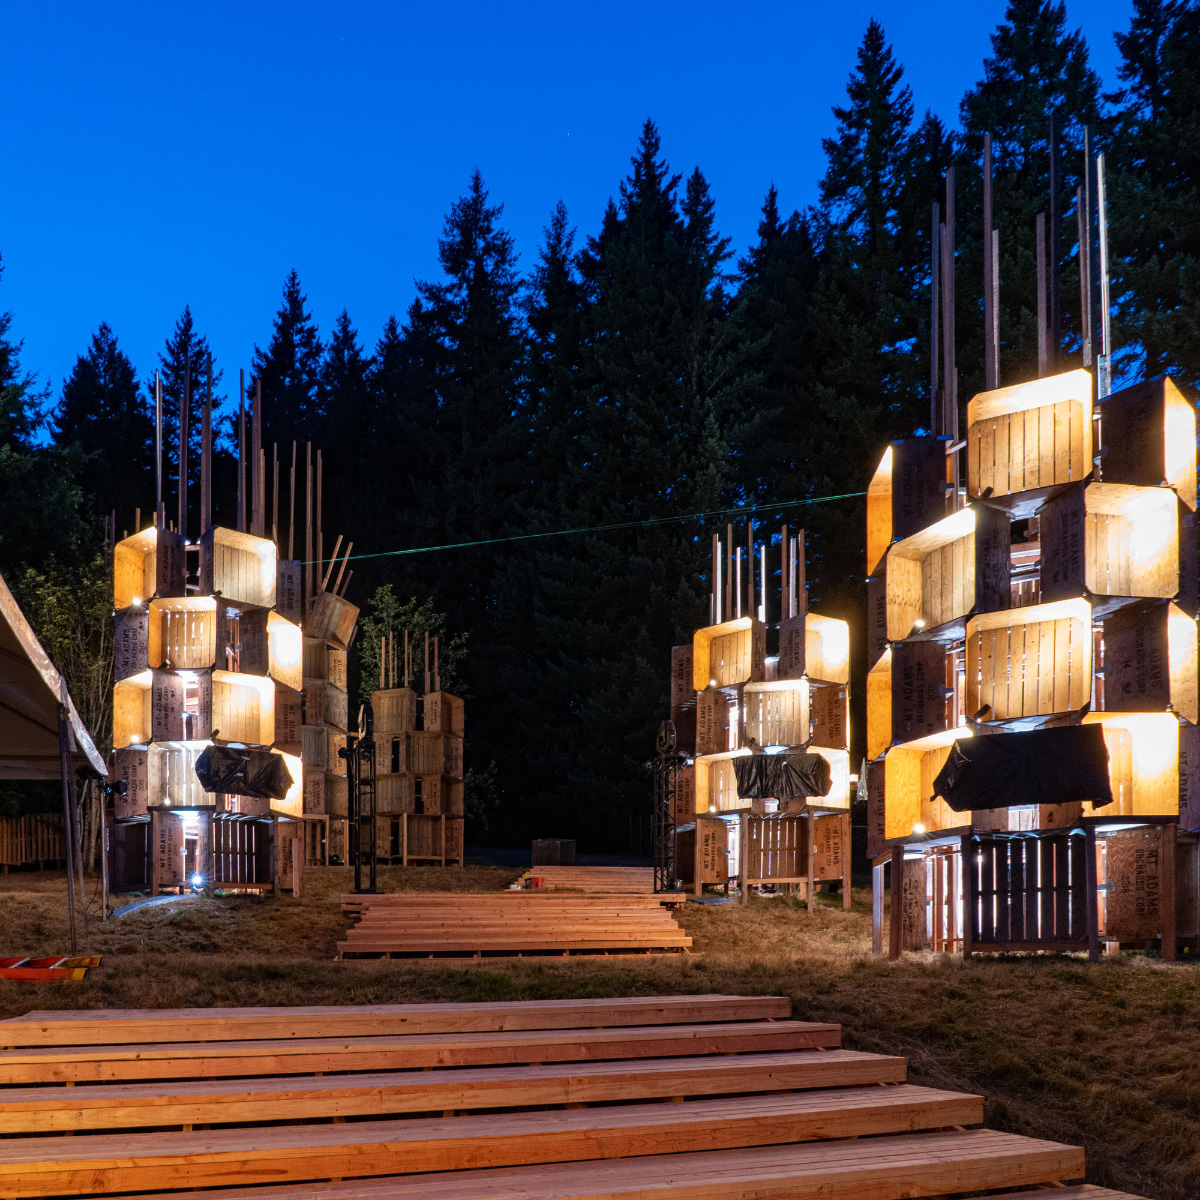 Photo of towers at night made from wooden apple bins, on the PSU campus for the Pickathon Music Festival